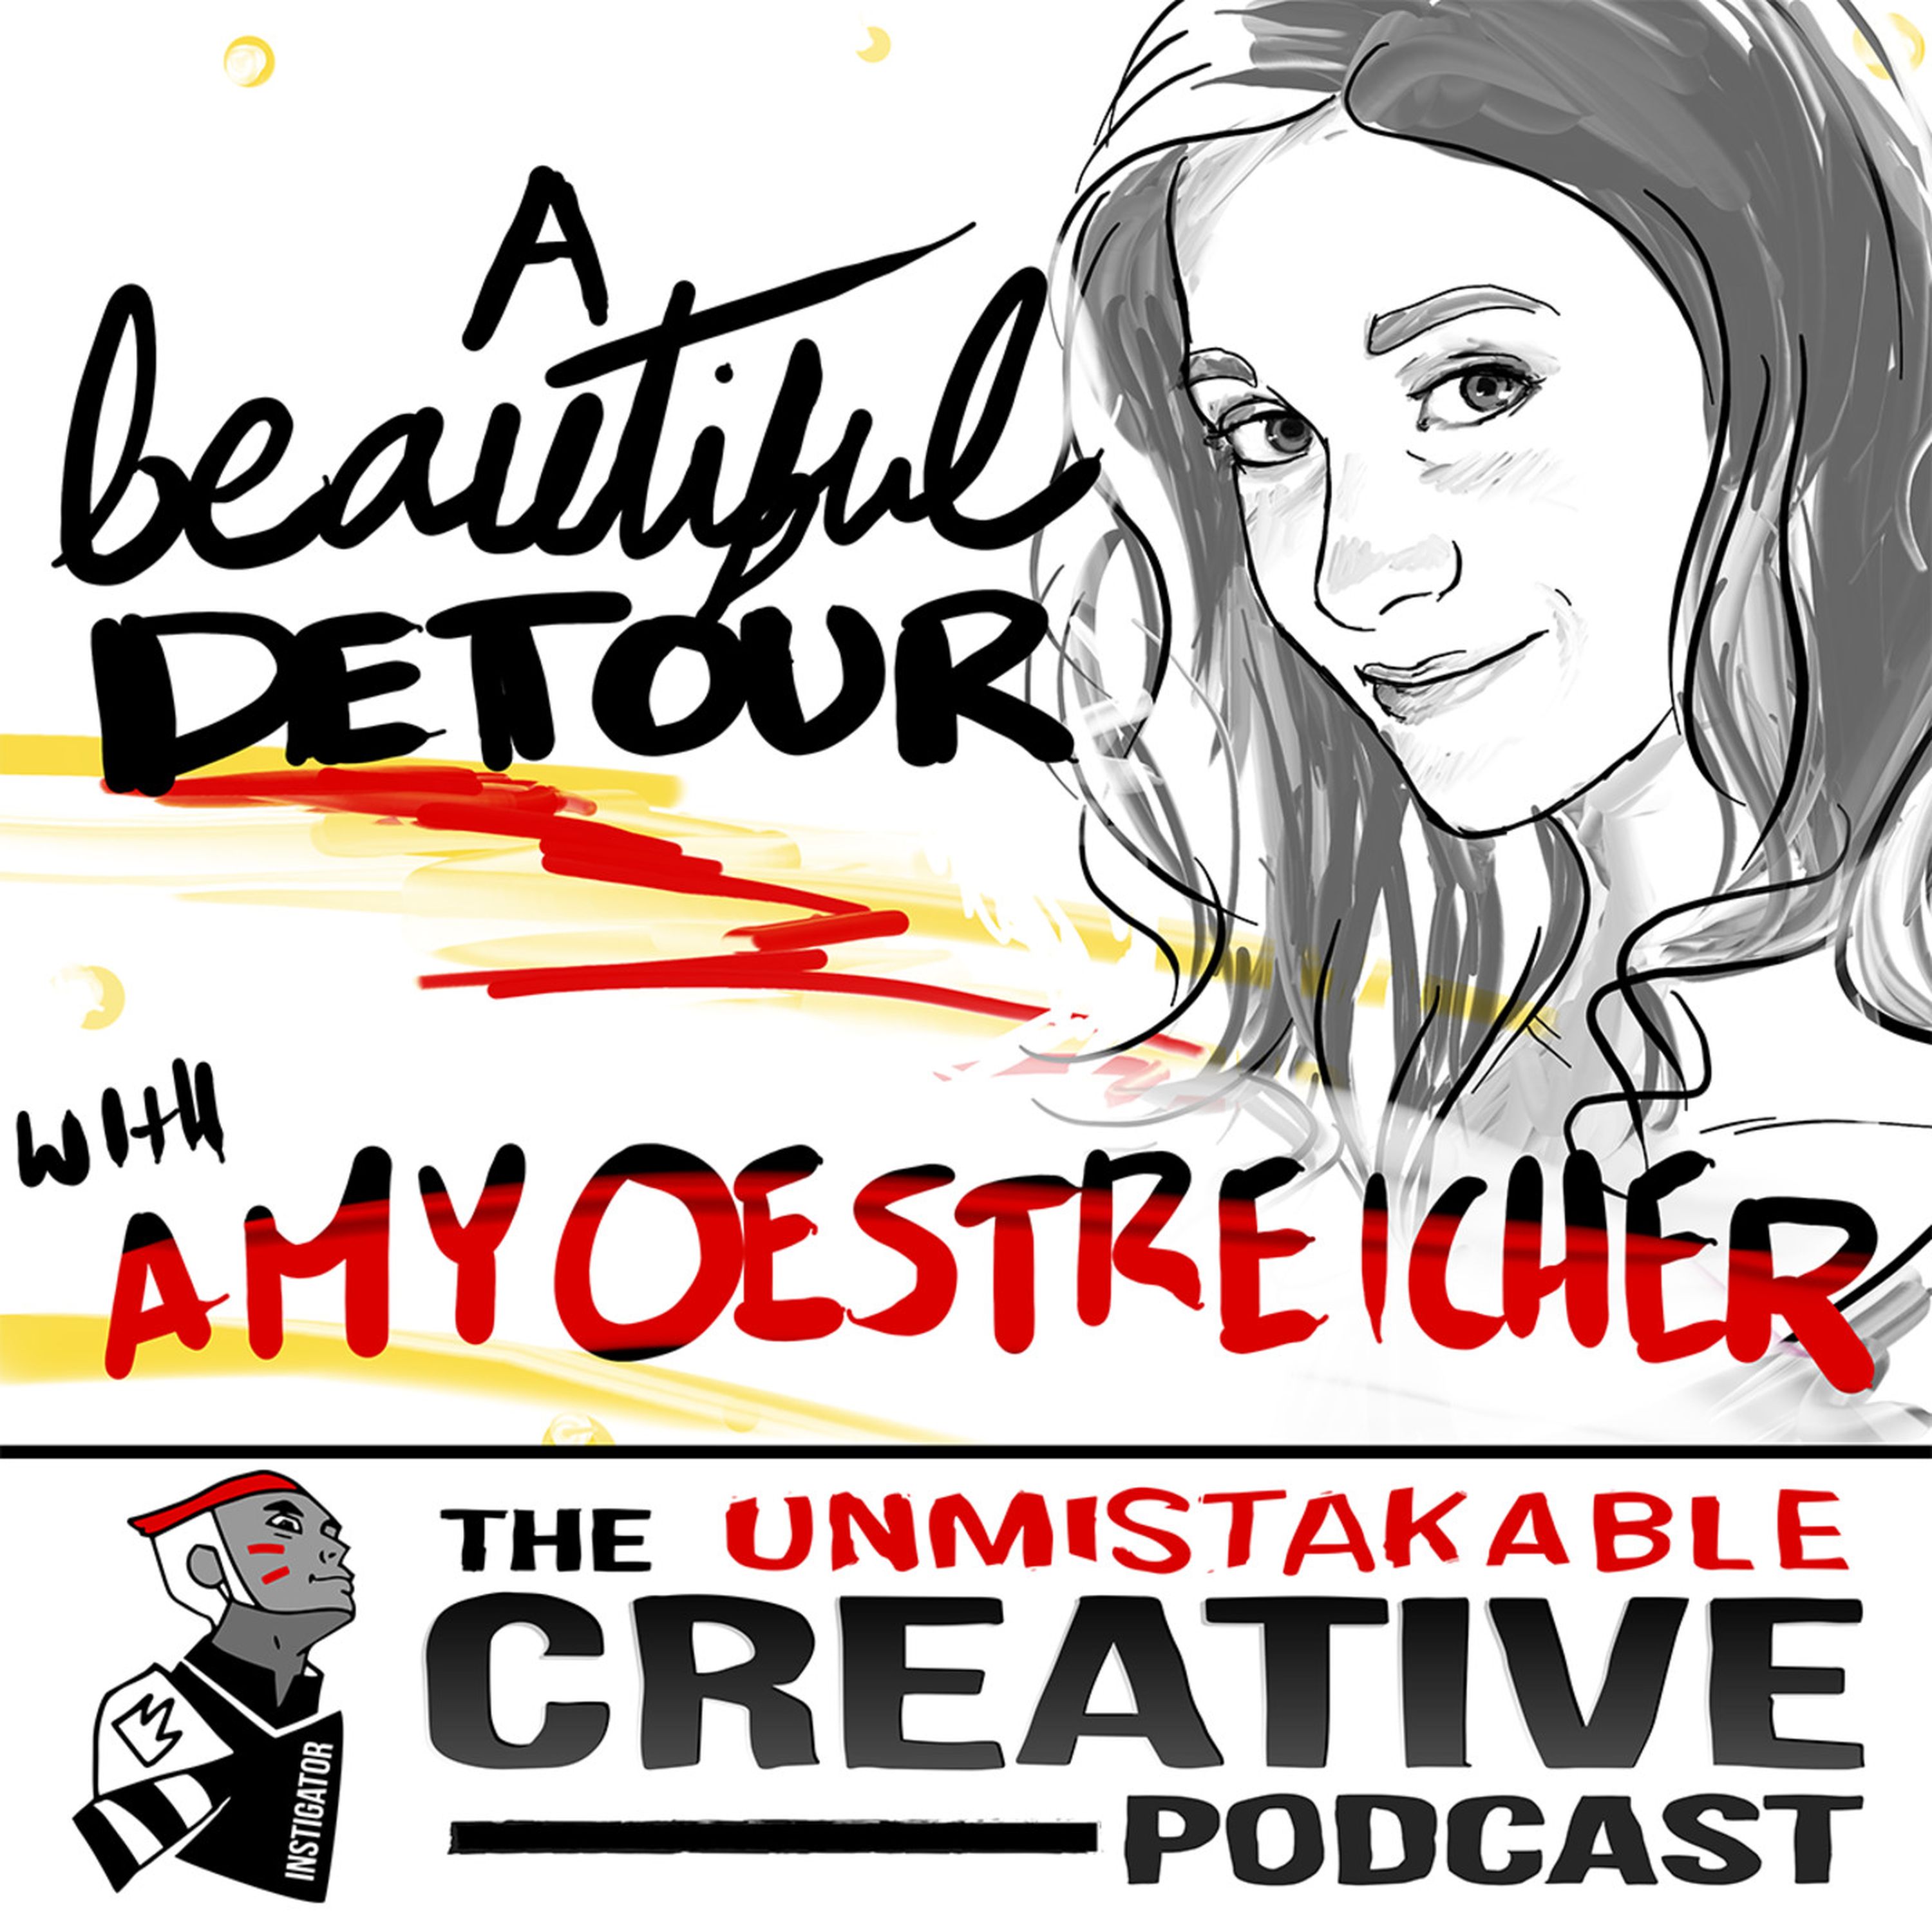 A Beautiful Detour with Amy Oestreicher